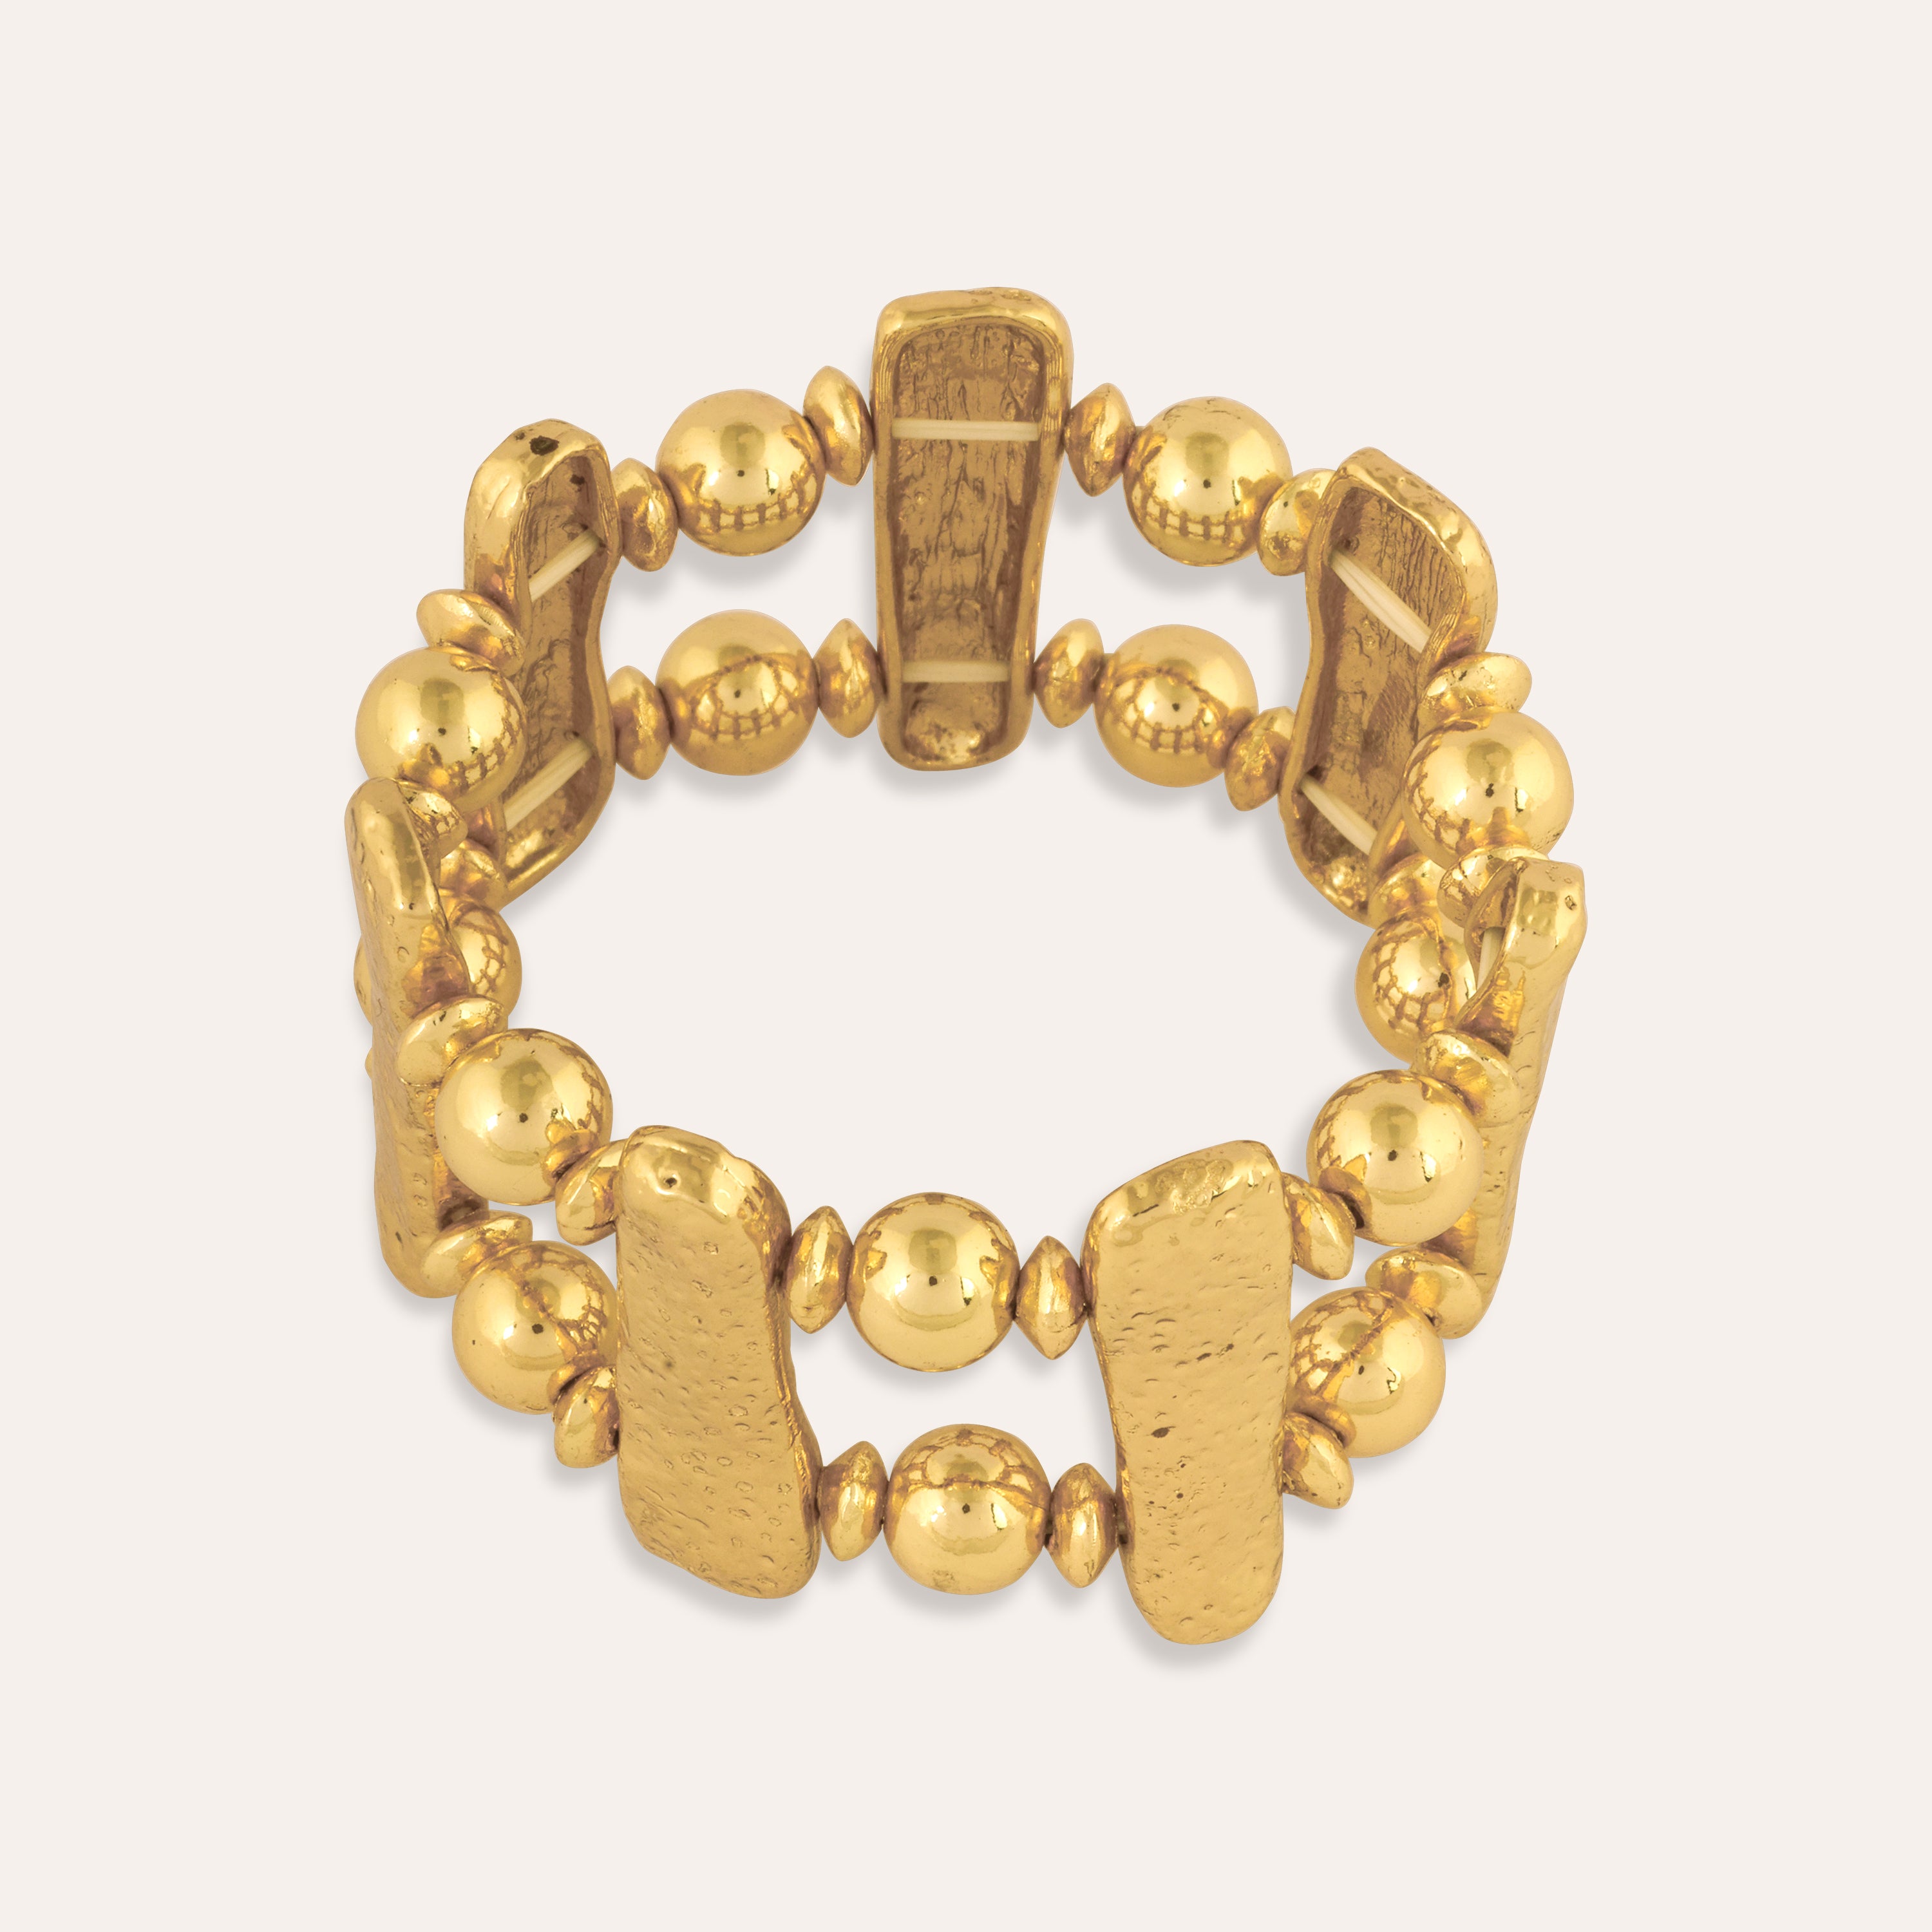 TFC Aureate Gold Plated Adjustable Bracelet Band-Discover our stunning collection of stylish bracelets for women, featuring exquisite pearl bracelets, handcrafted beaded bracelets, and elegant gold-plated designs. Enjoy cheapest anti-tarnish fashion jewellery and long-lasting brilliance only at The Fun Company